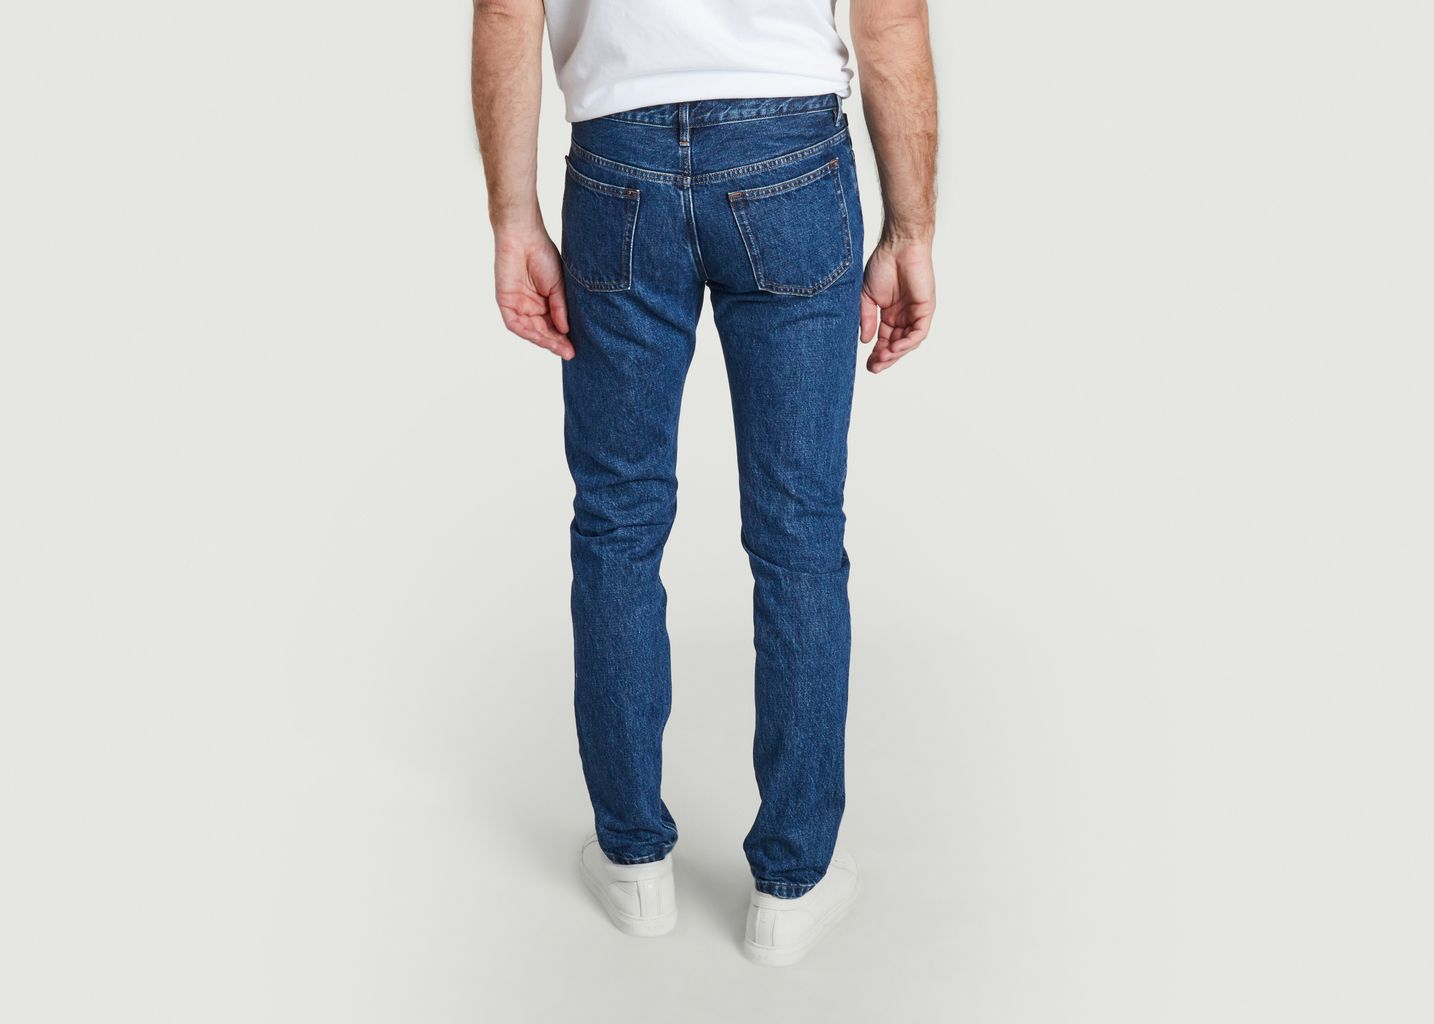 New standard small jeans - A.P.C.